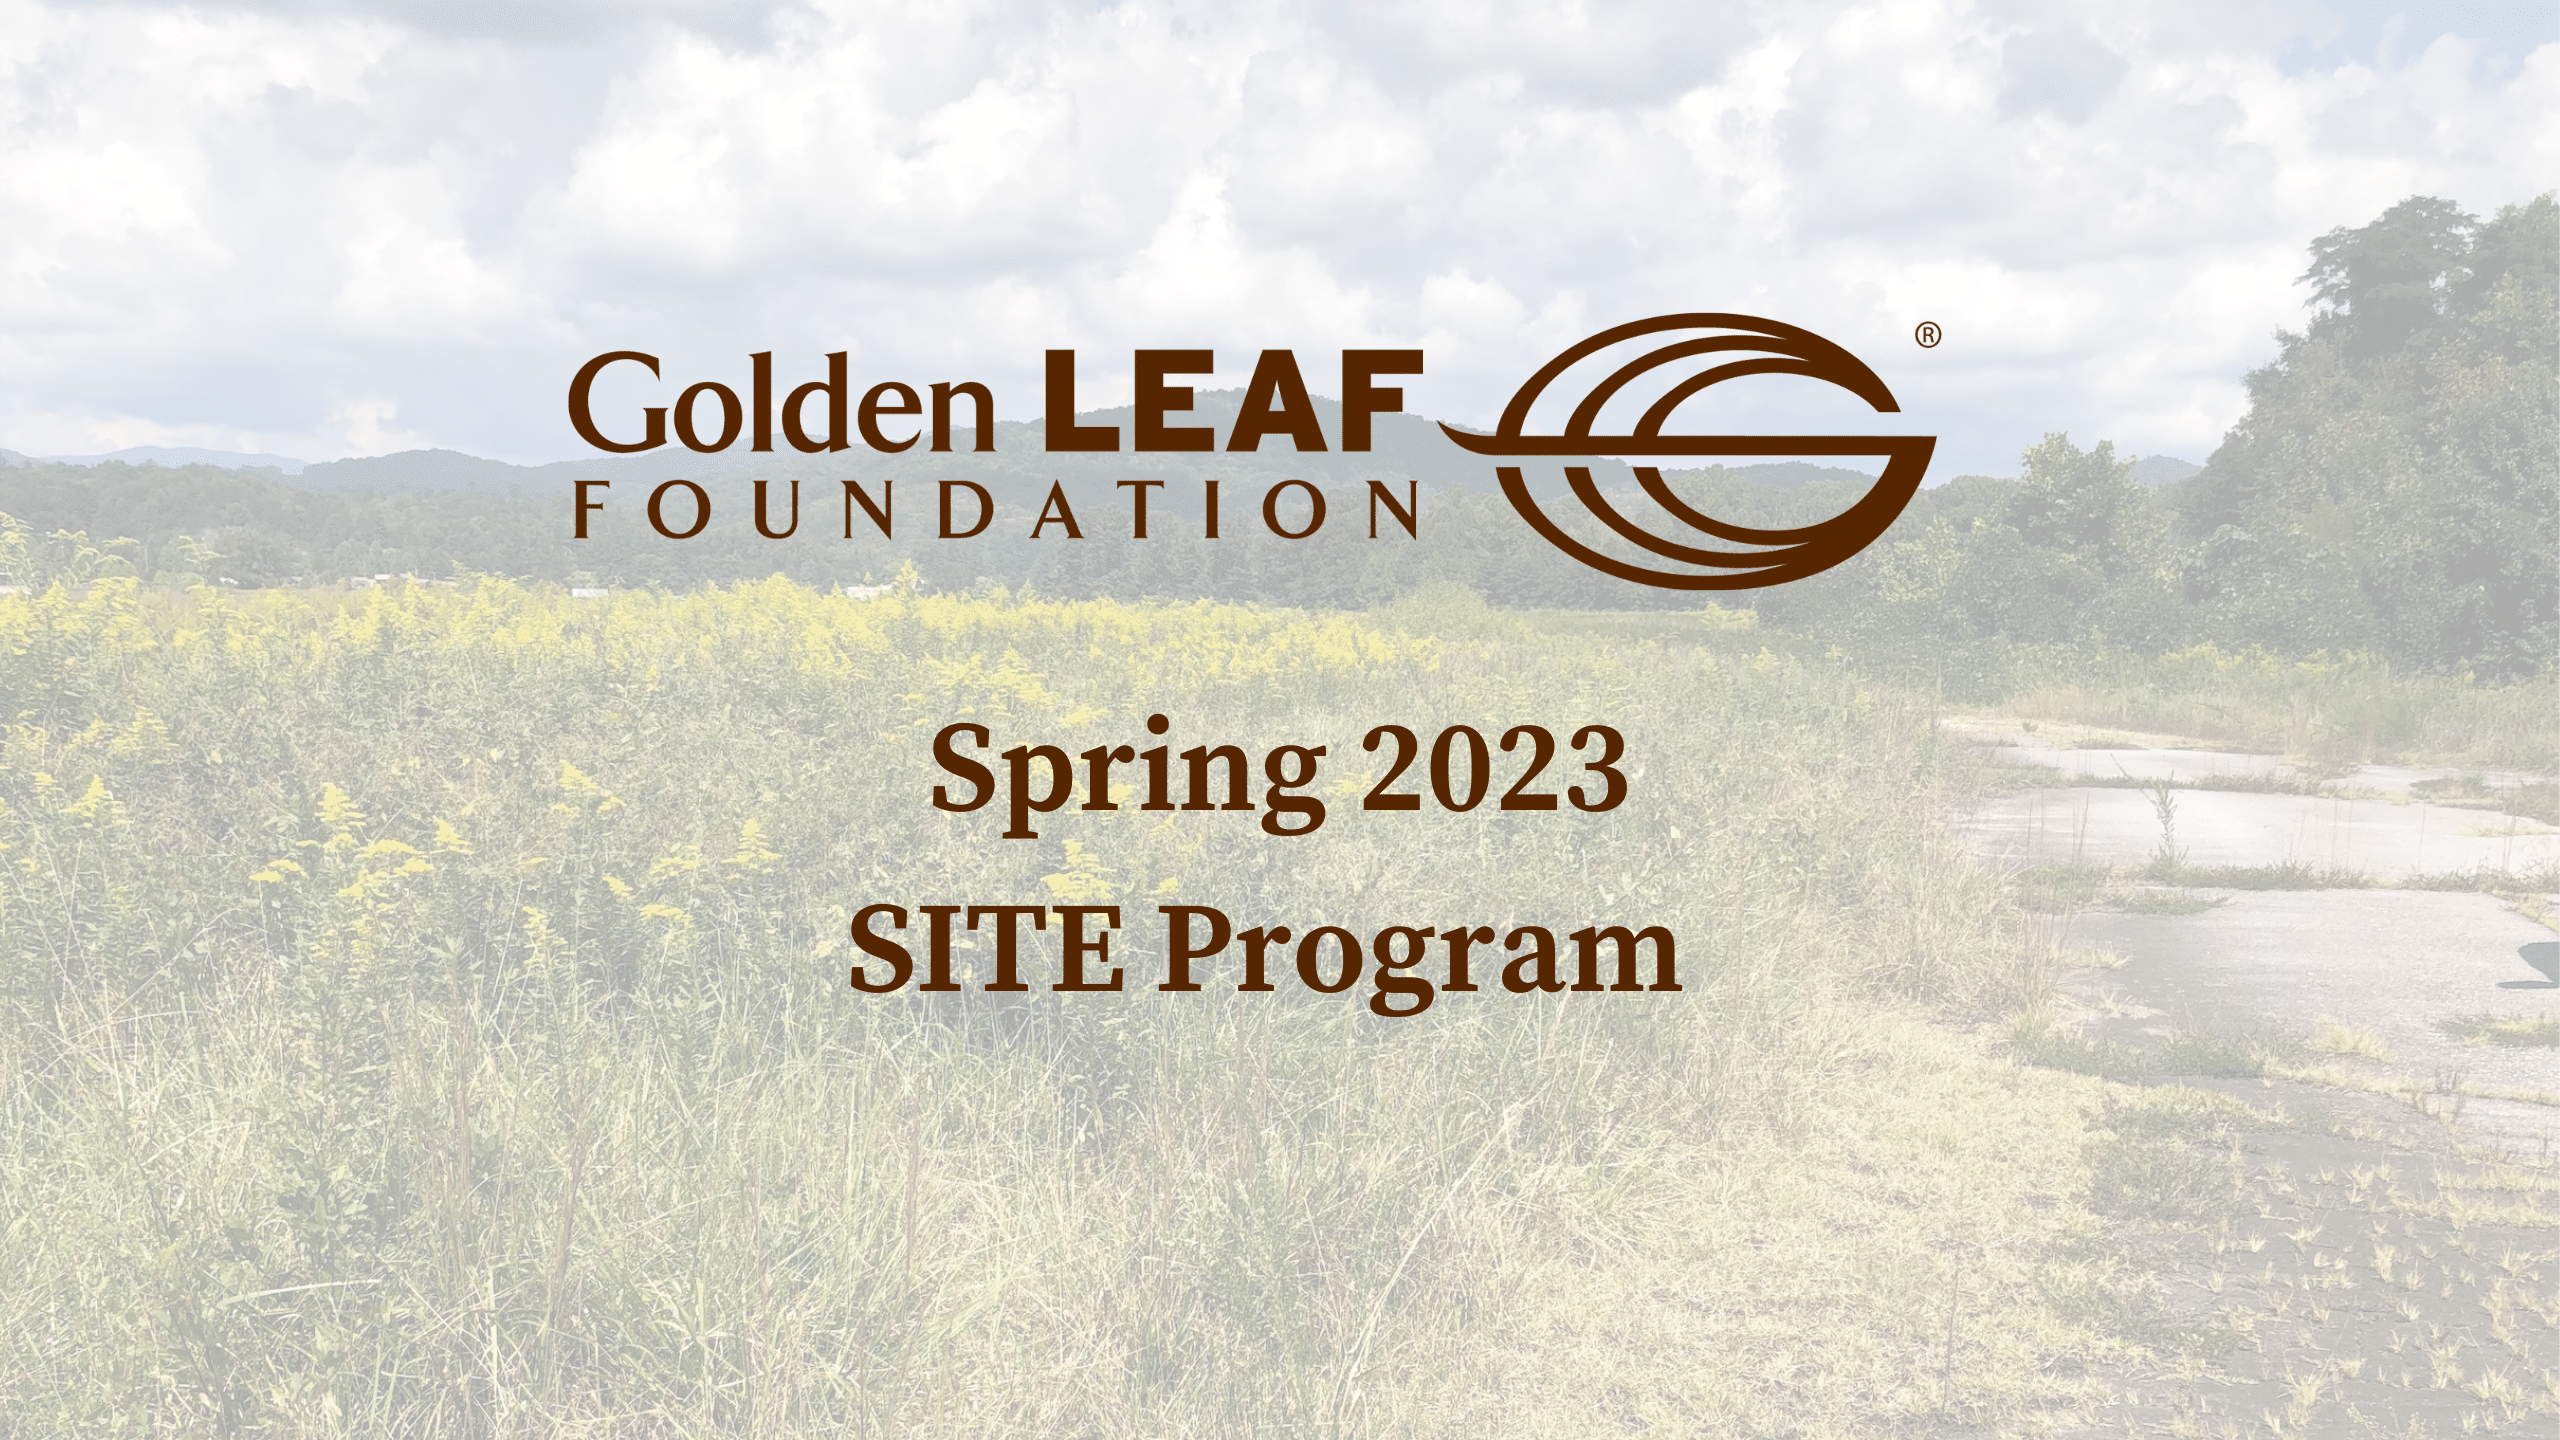 Spring 2023 round of the SITE Program results in $4.5 million in funding